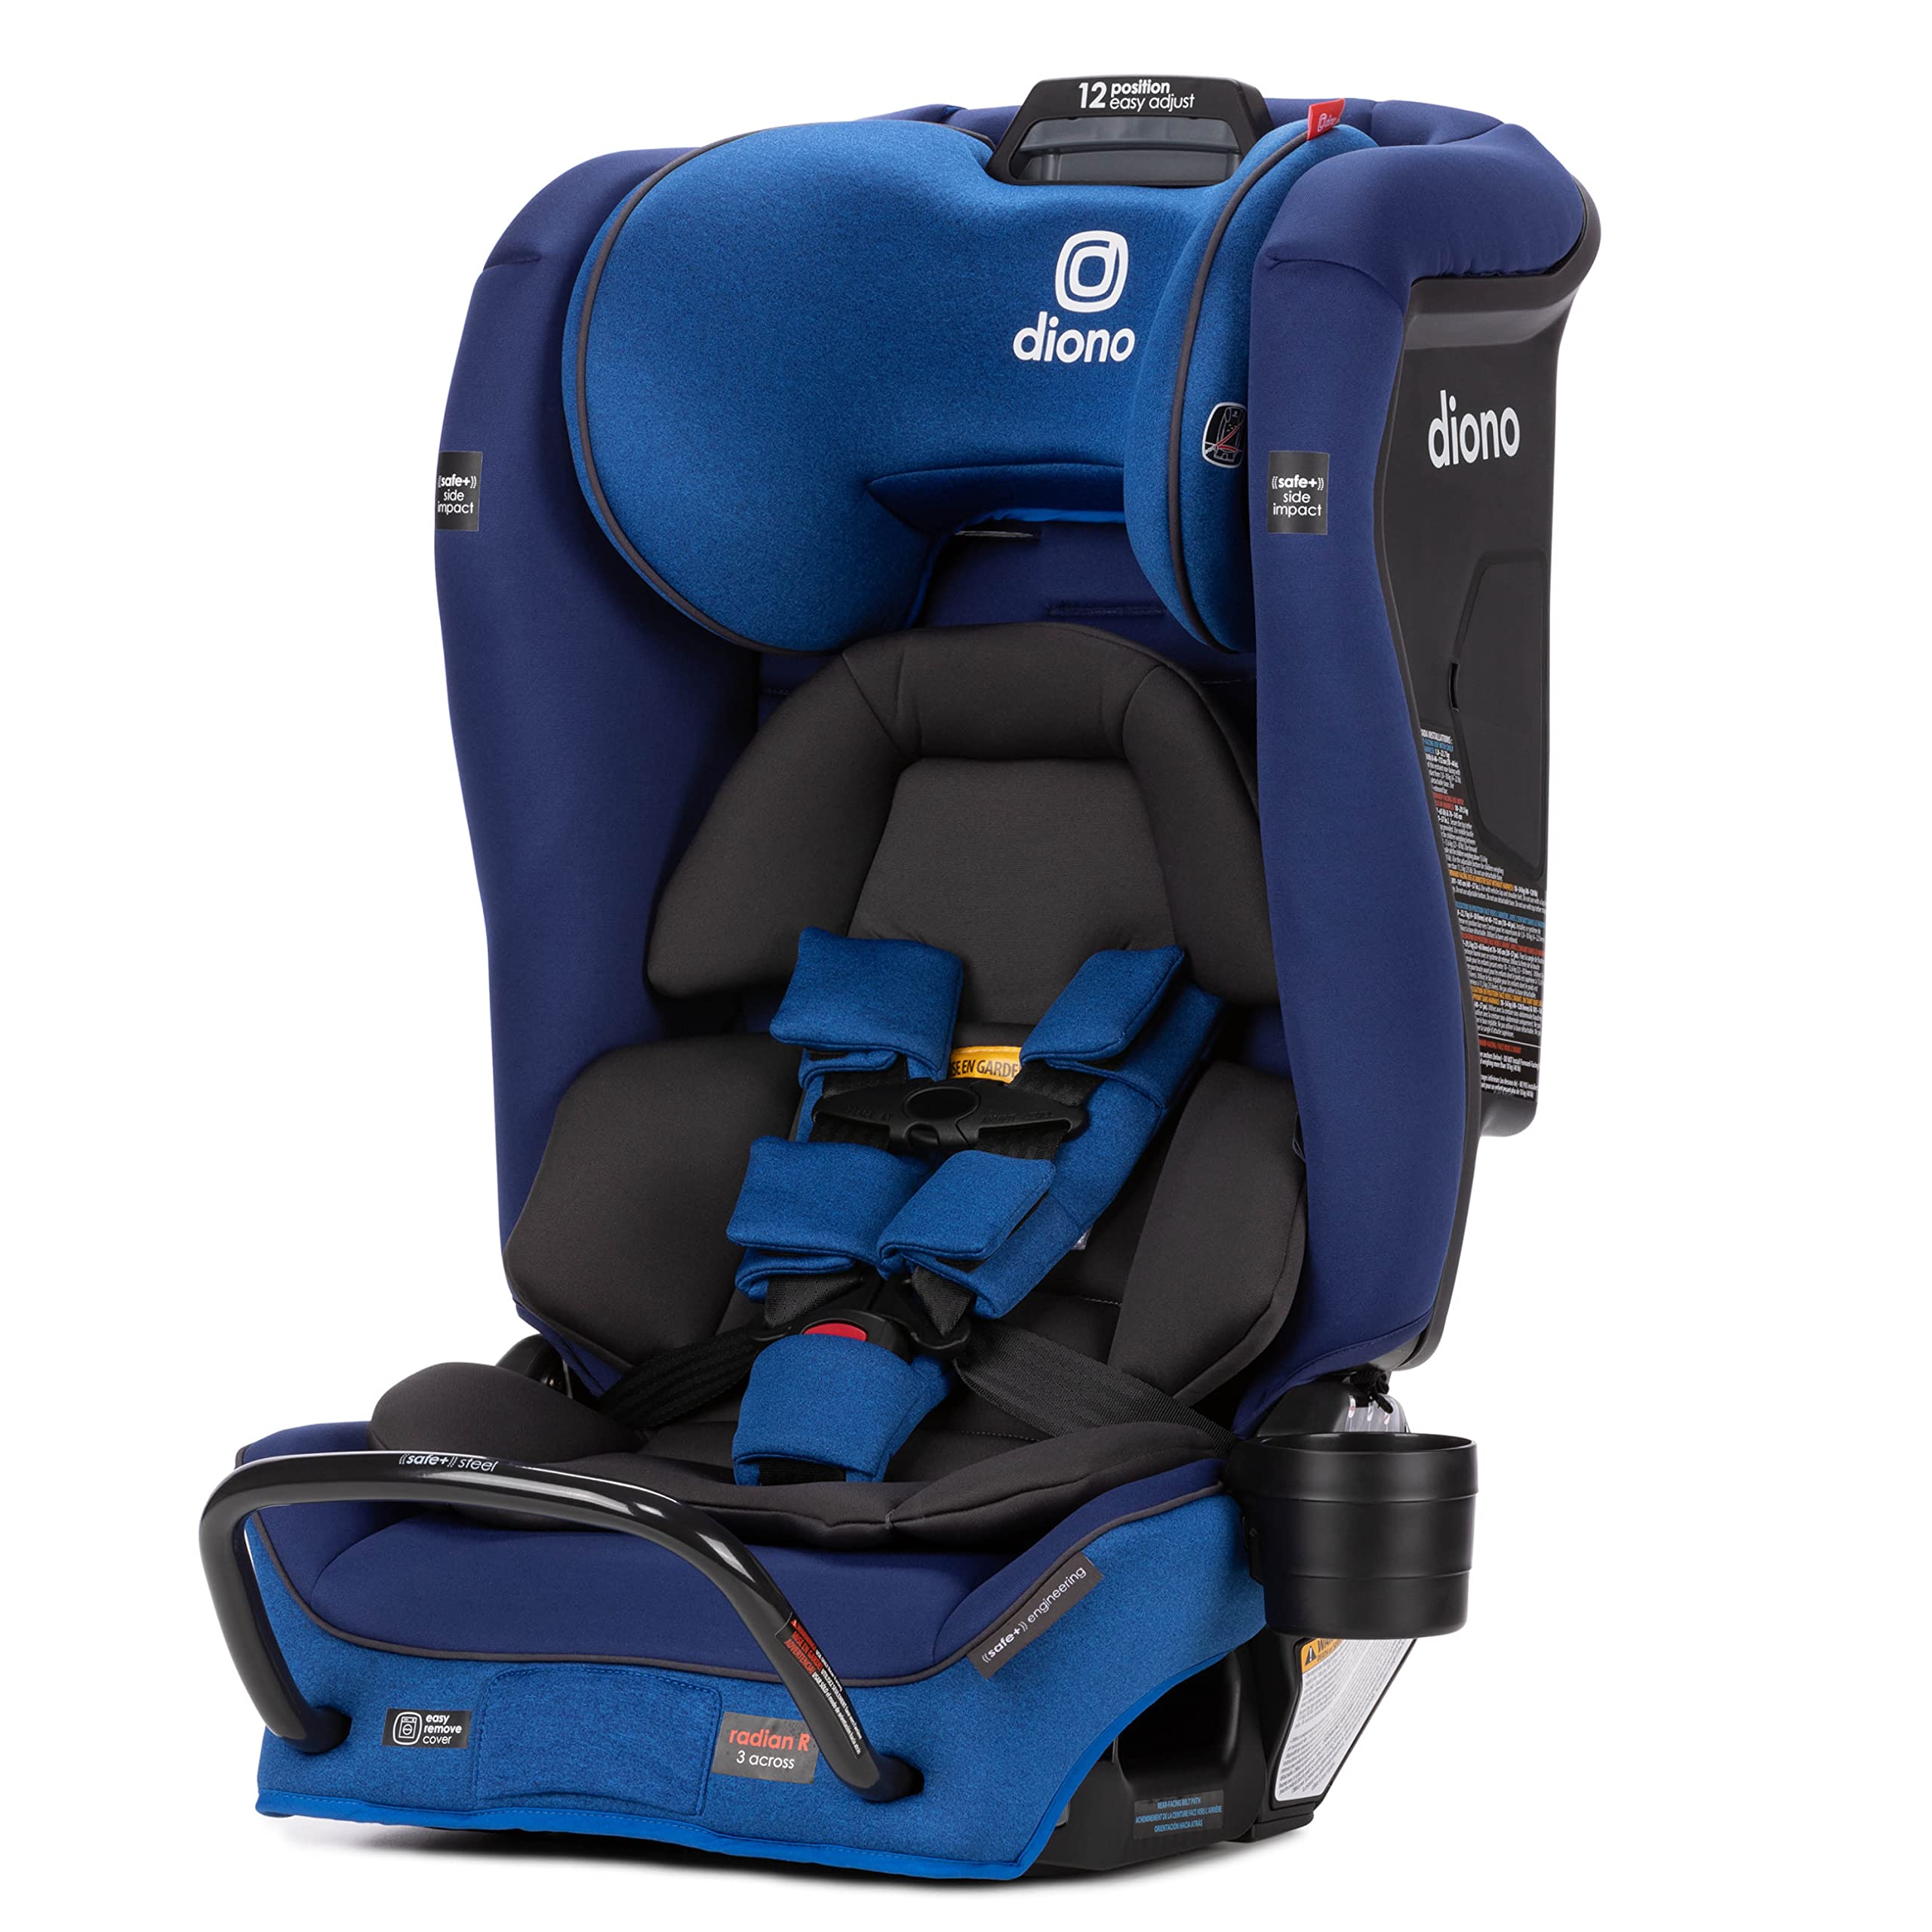 Diono Radian 3RXT SafePlus, 4-in-1 convertible car Seat, Rear and Forward Facing, SafePlus Engineering, 3 Stage Infant Protectio